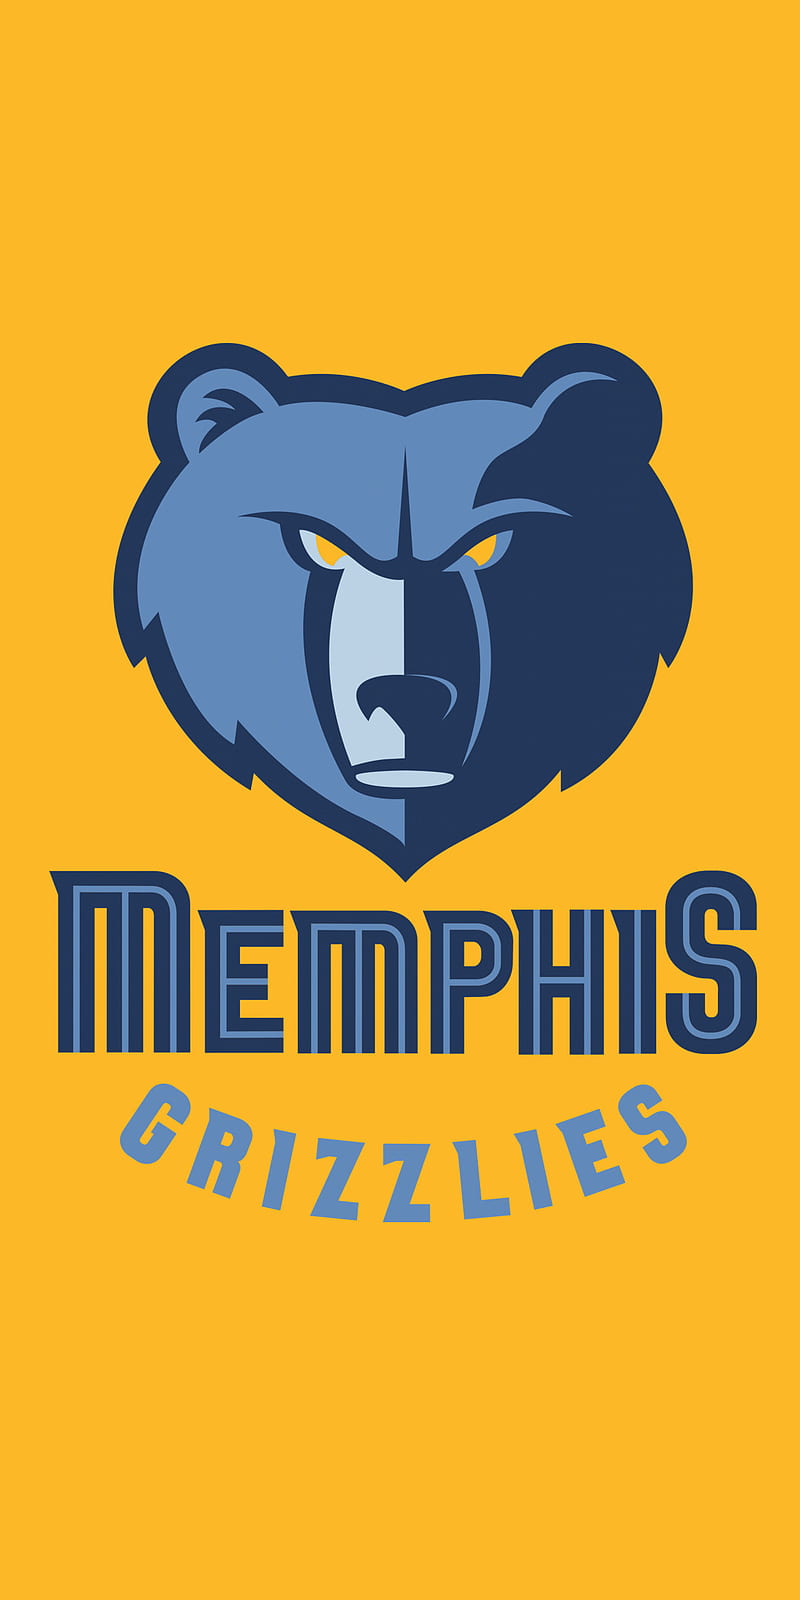 30 Memphis Grizzlies HD Wallpapers and Backgrounds